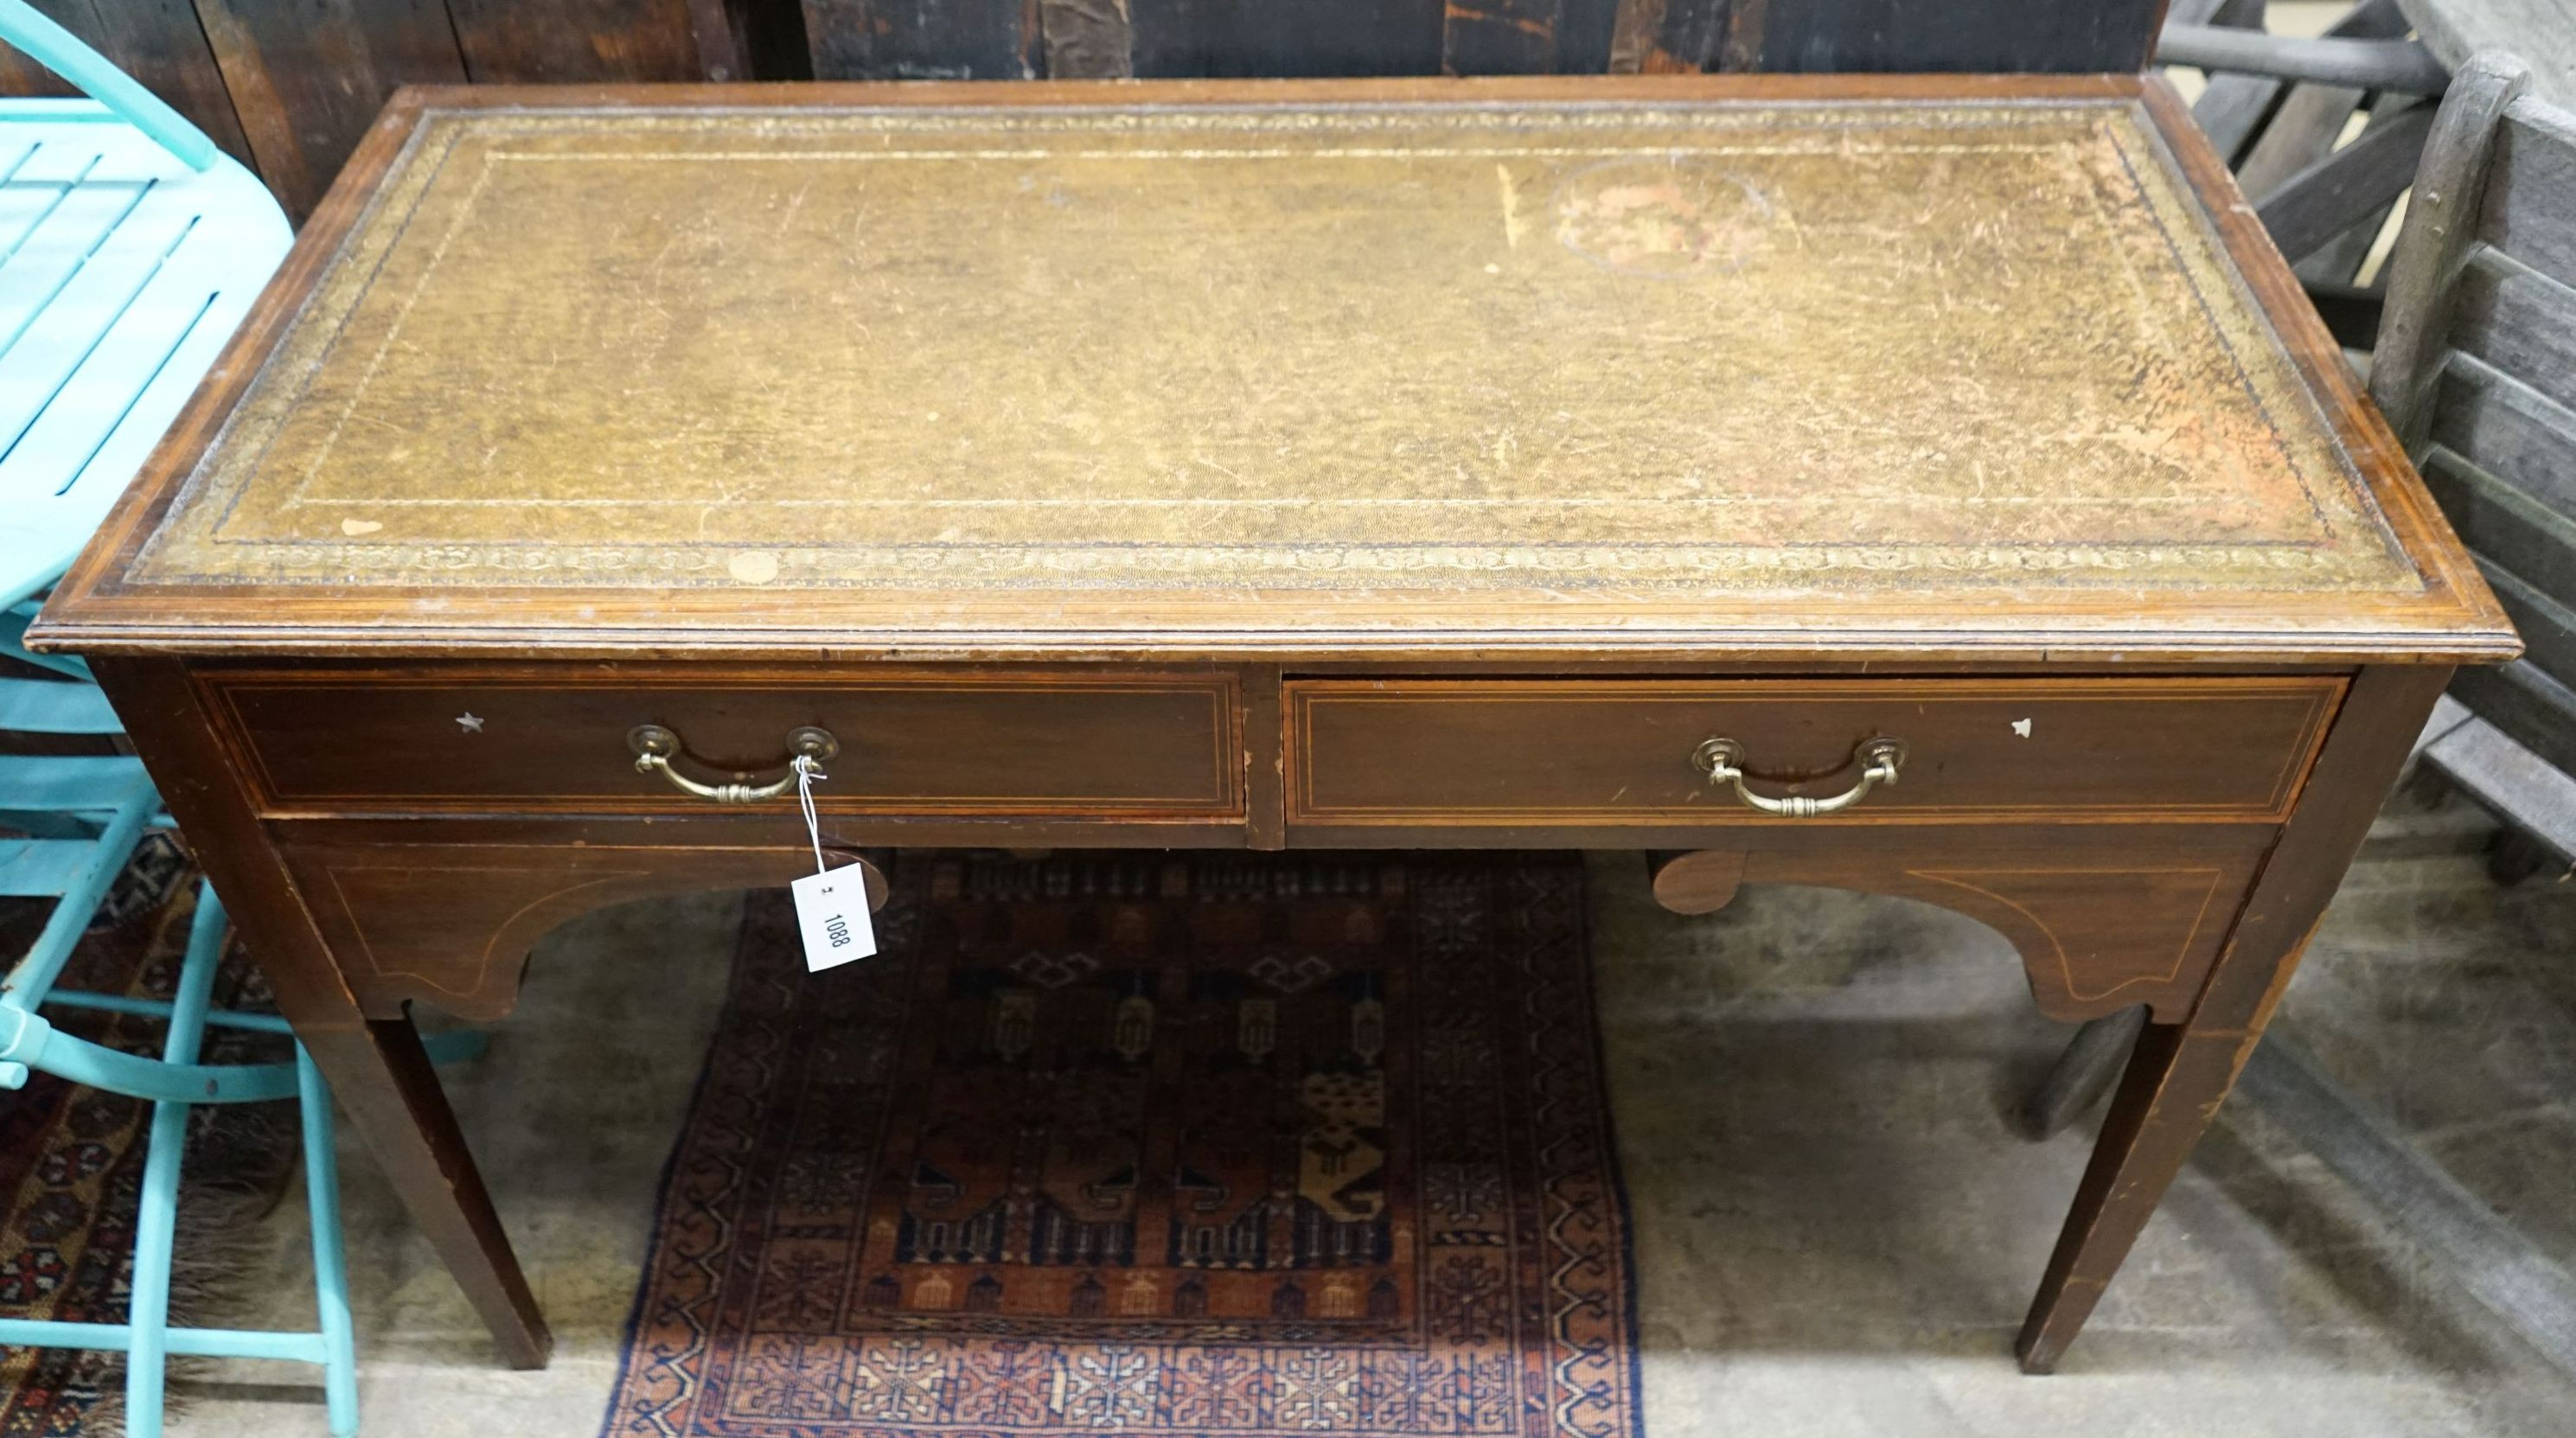 An Edwardian satinwood banded mahogany writing table, width 115cm, depth 53cm, height 72cm